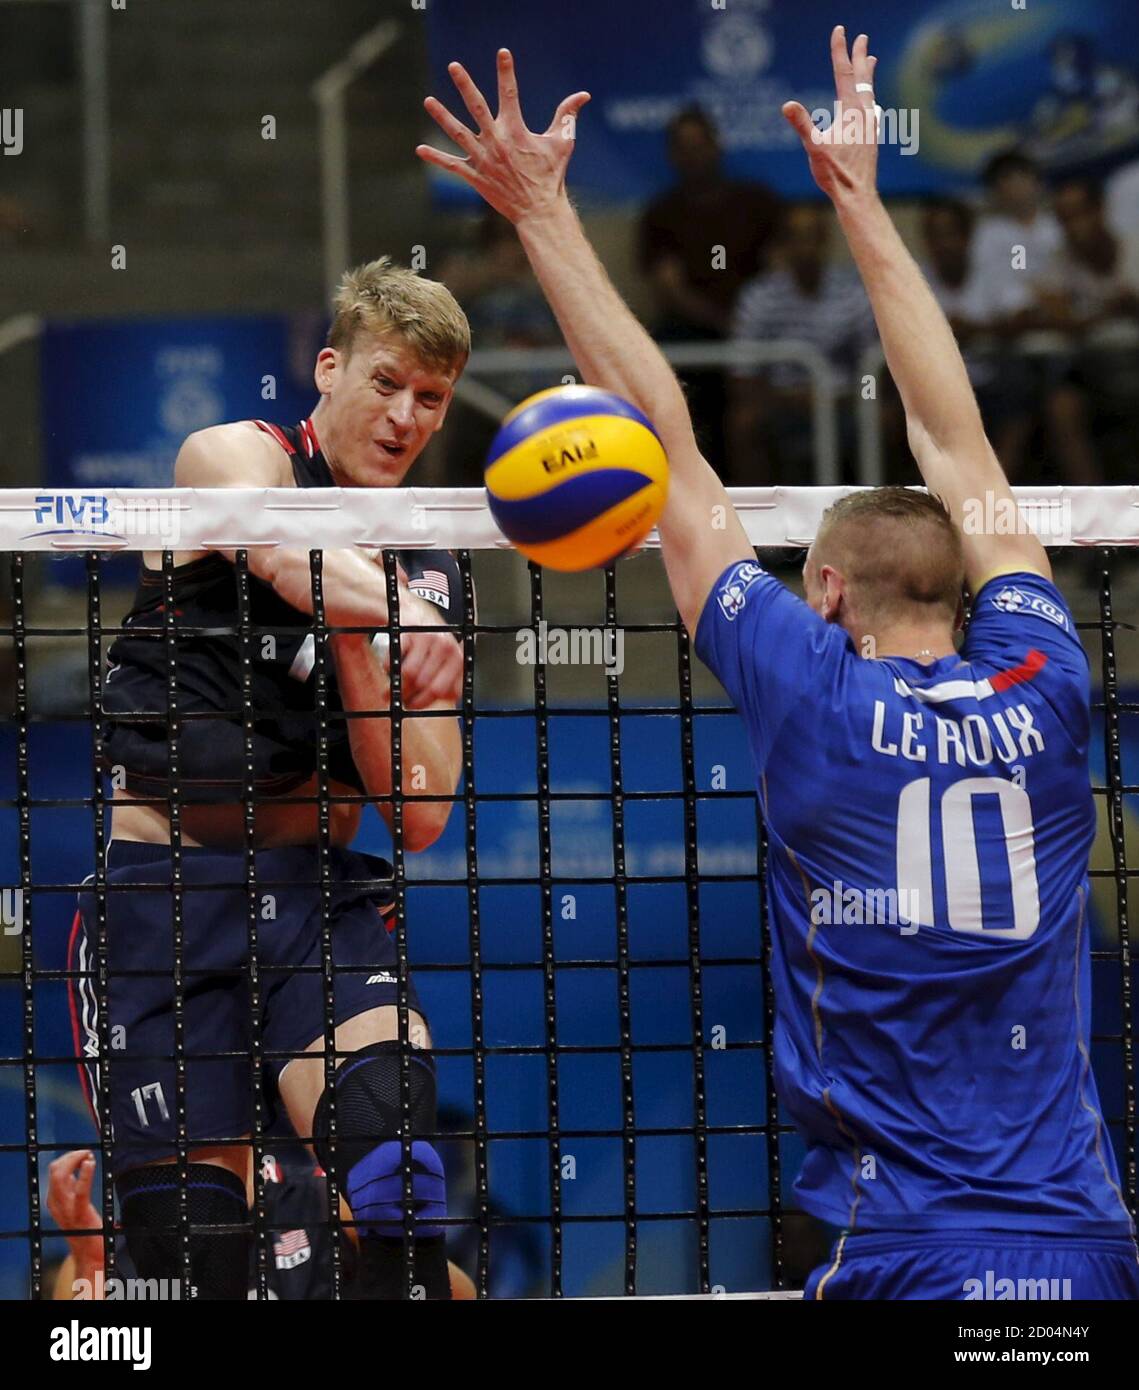 Maxwell Holt (L) of the U.S. spikes the ball against Kevin Le Roux of  France during their FIVB Men's Volleyball World League final round group  match in Rio de Janeiro, Brazil, July